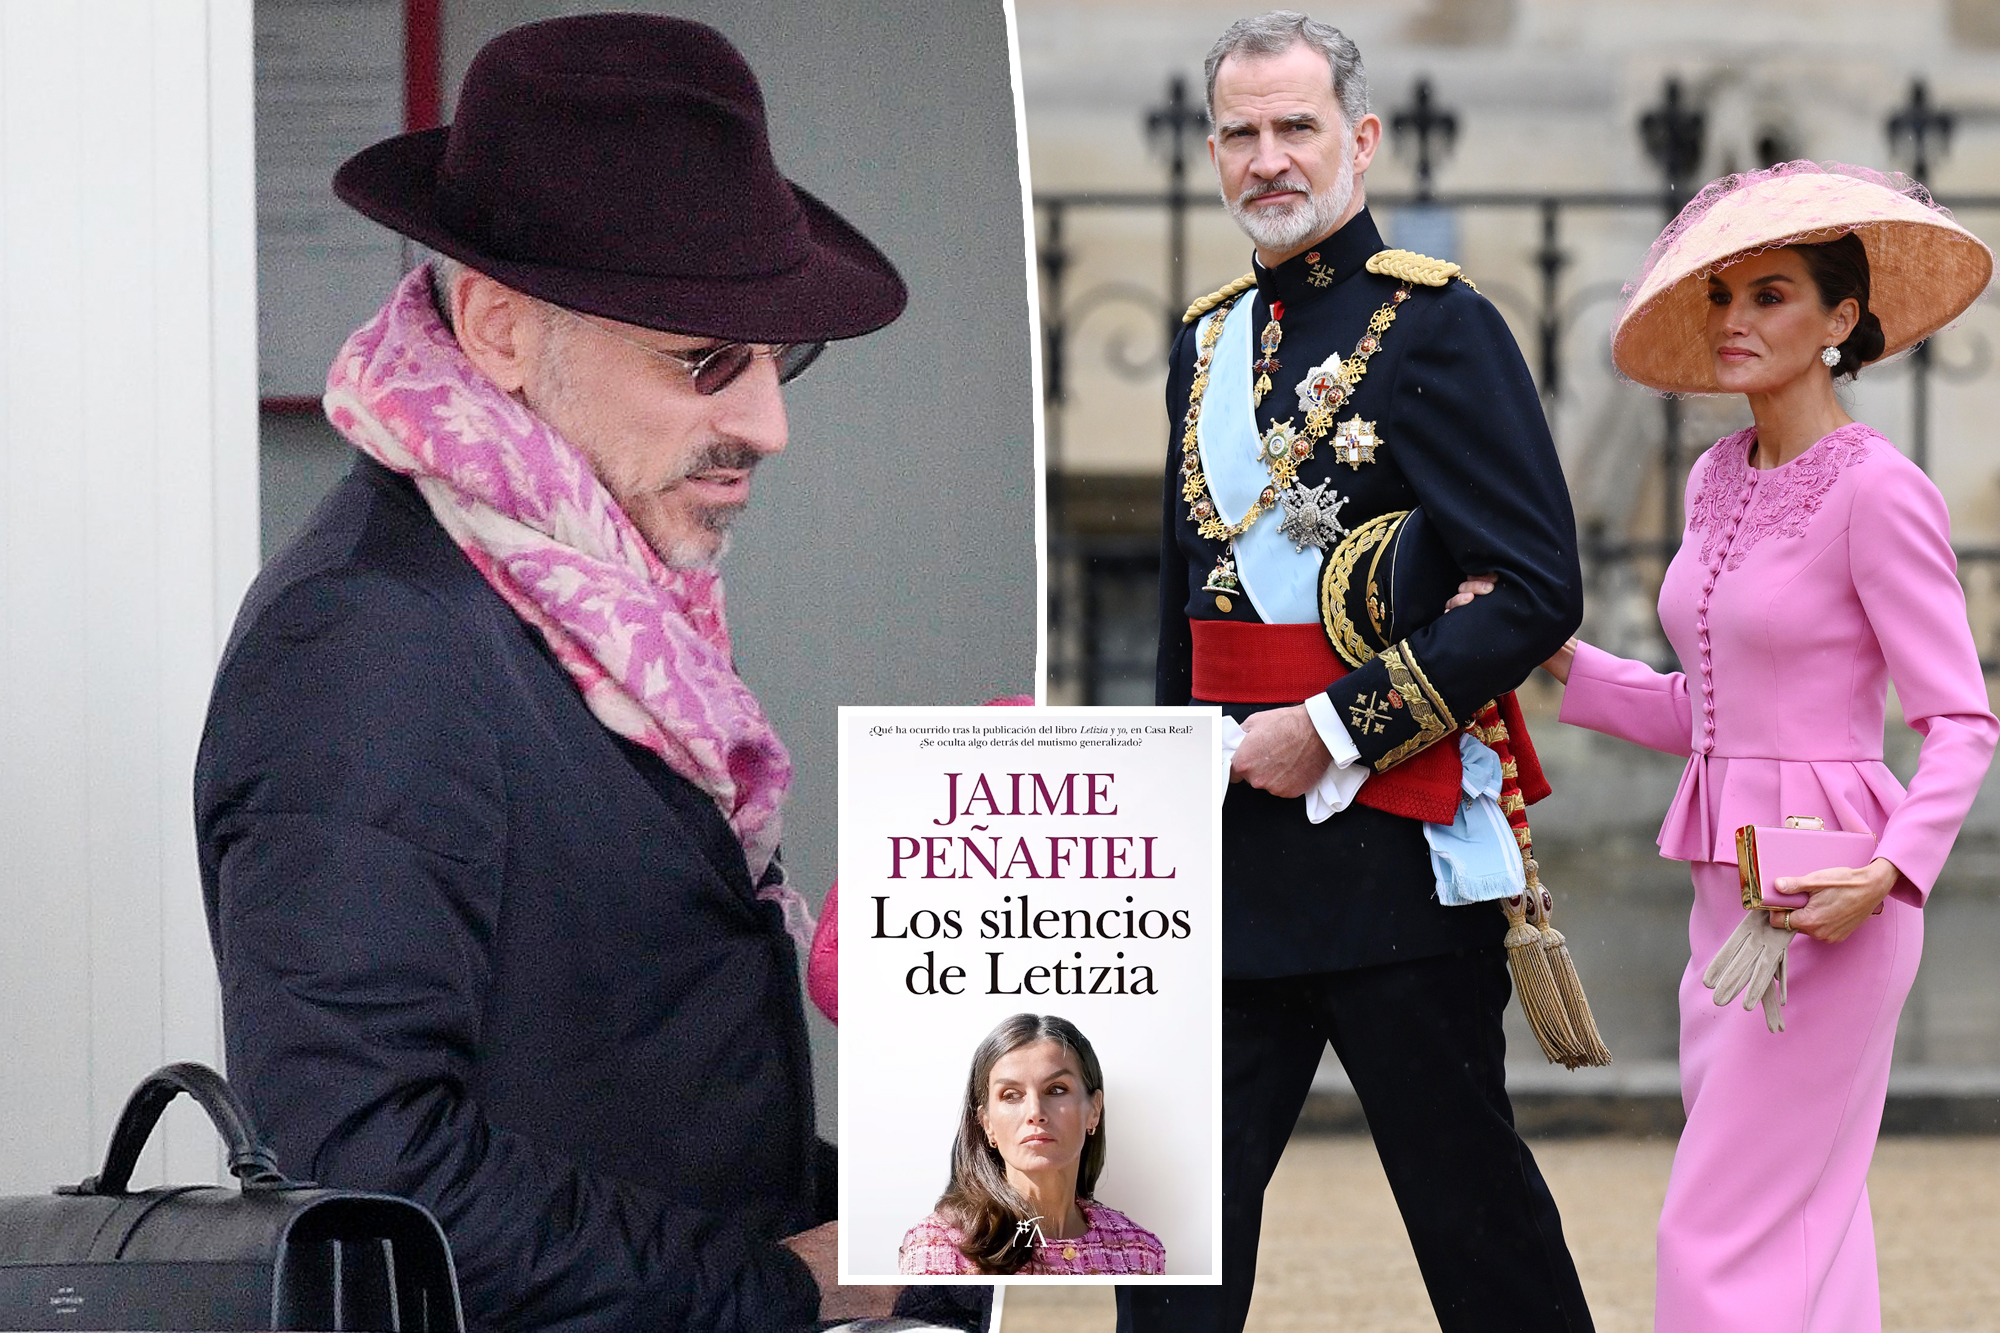 Queen Letizia of Spain Faces Allegations of Cheating on King Felipe VI